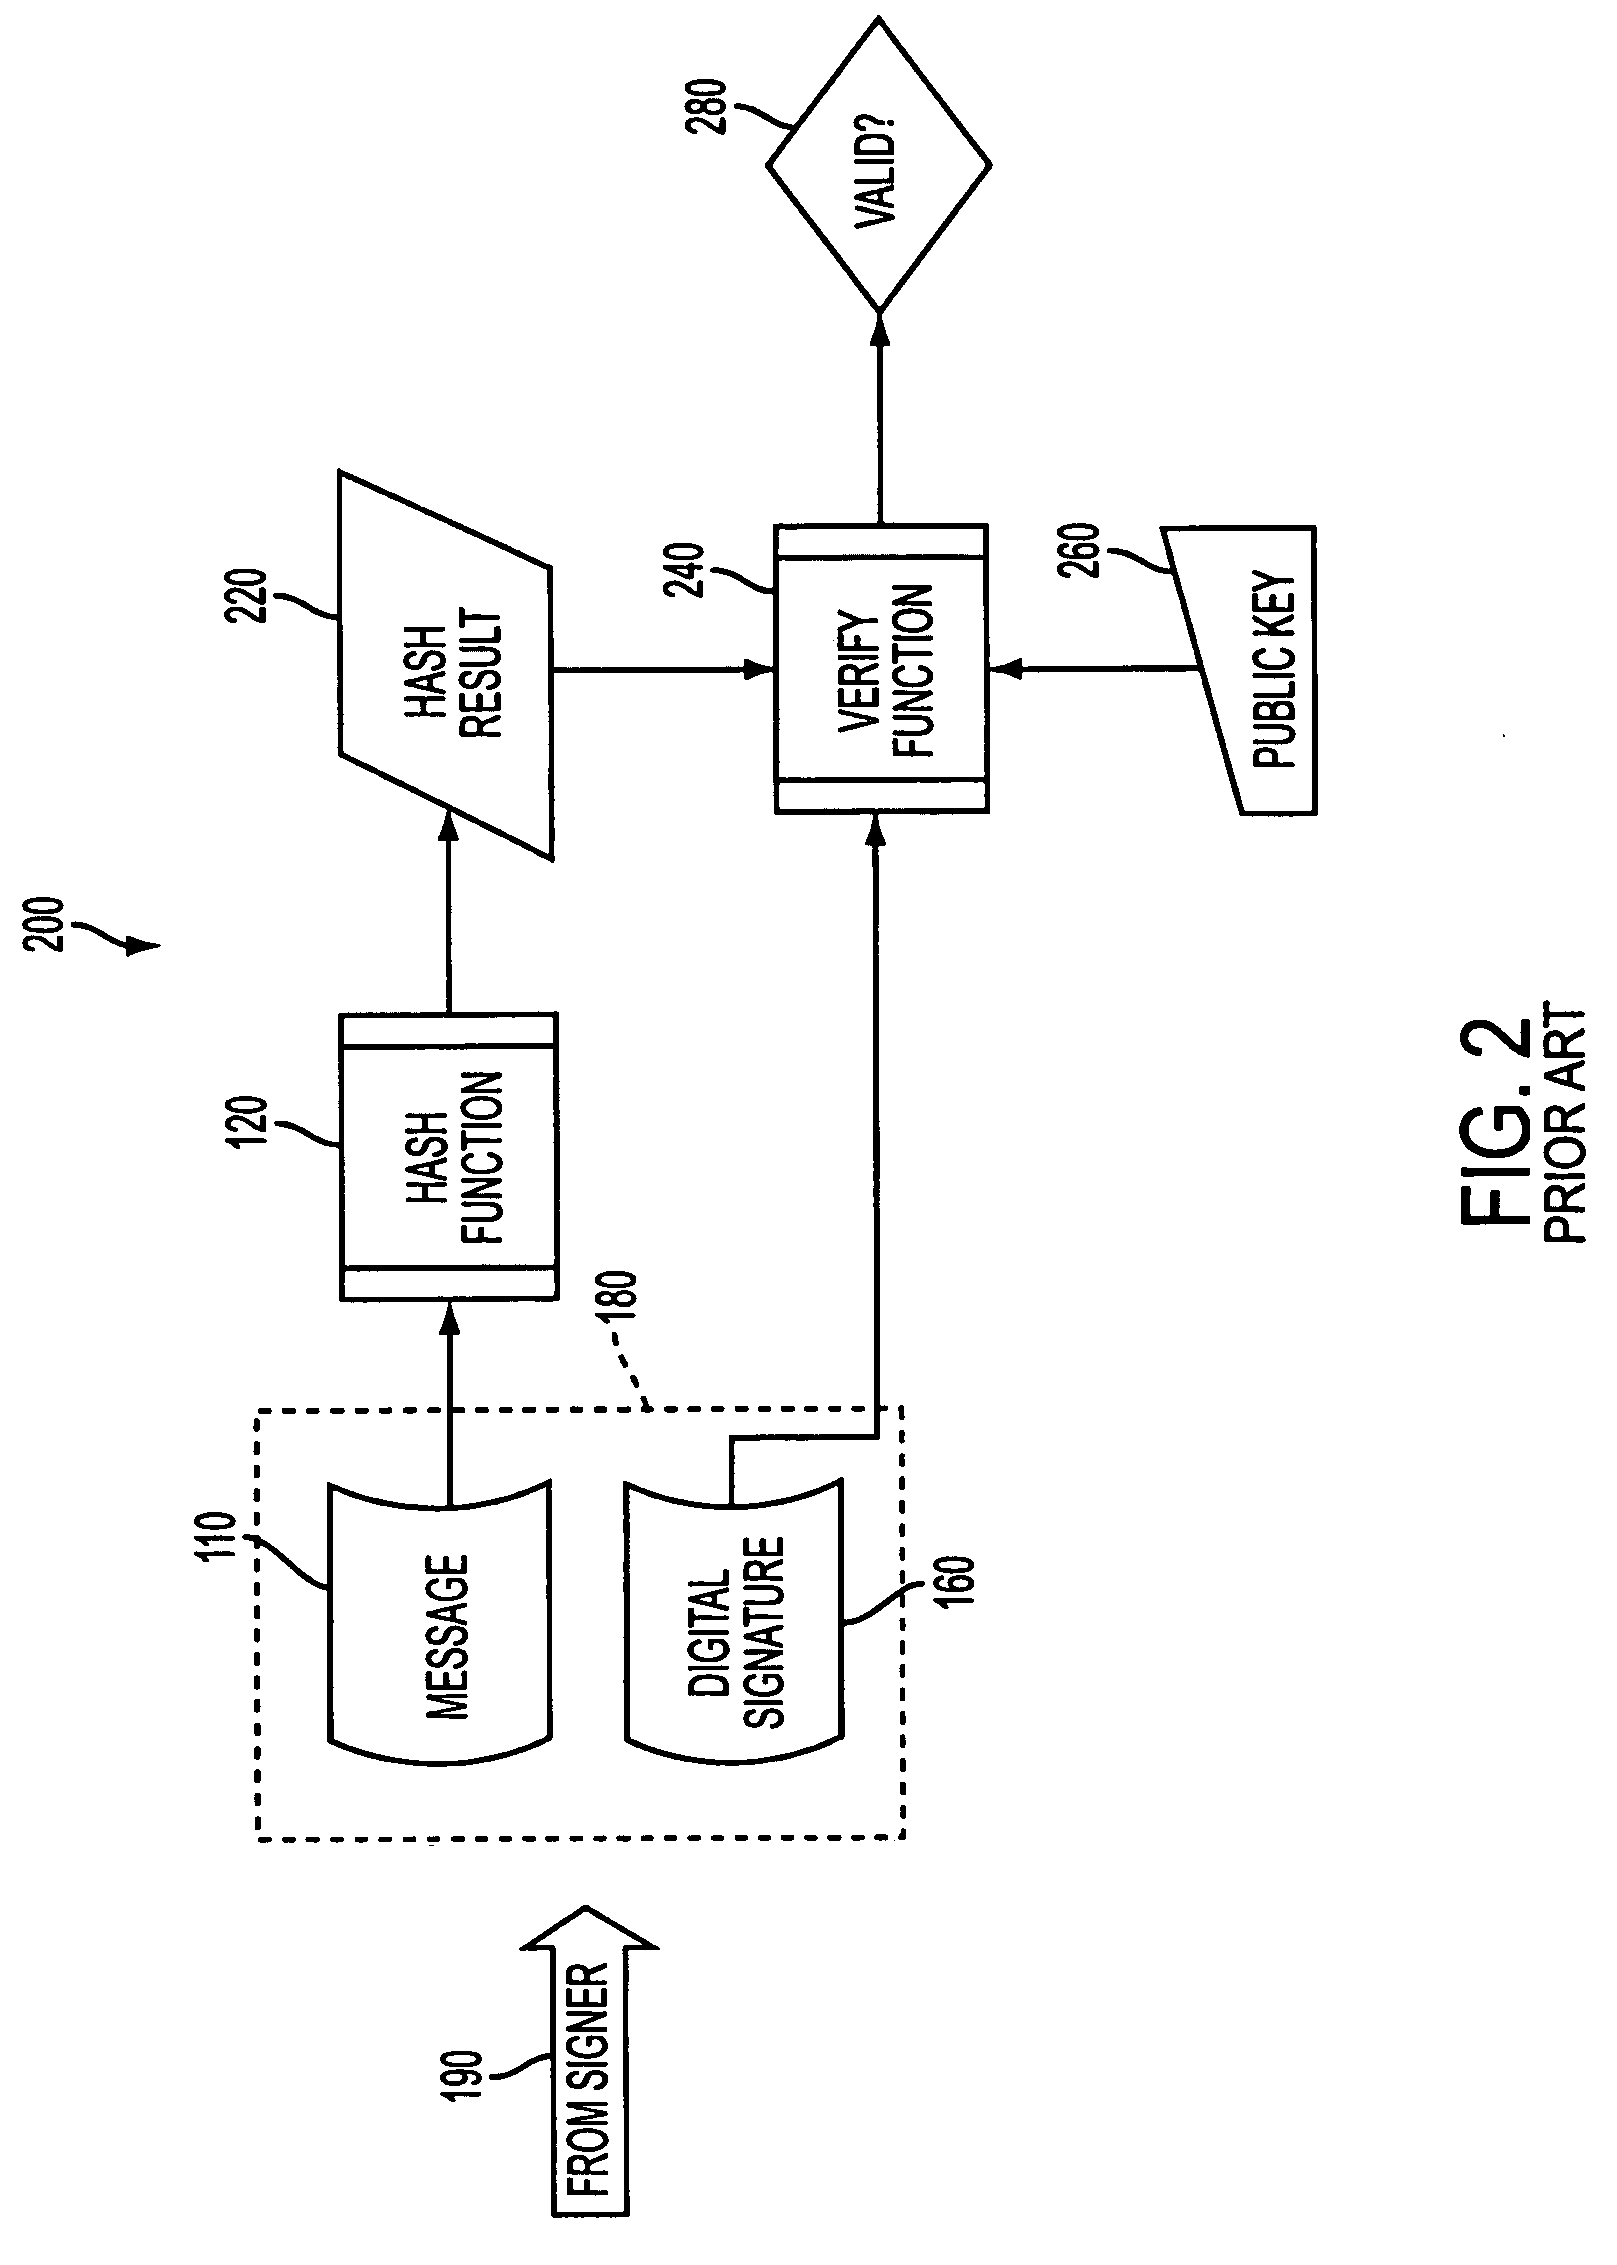 System and method for providing trusted time in content of digital data files